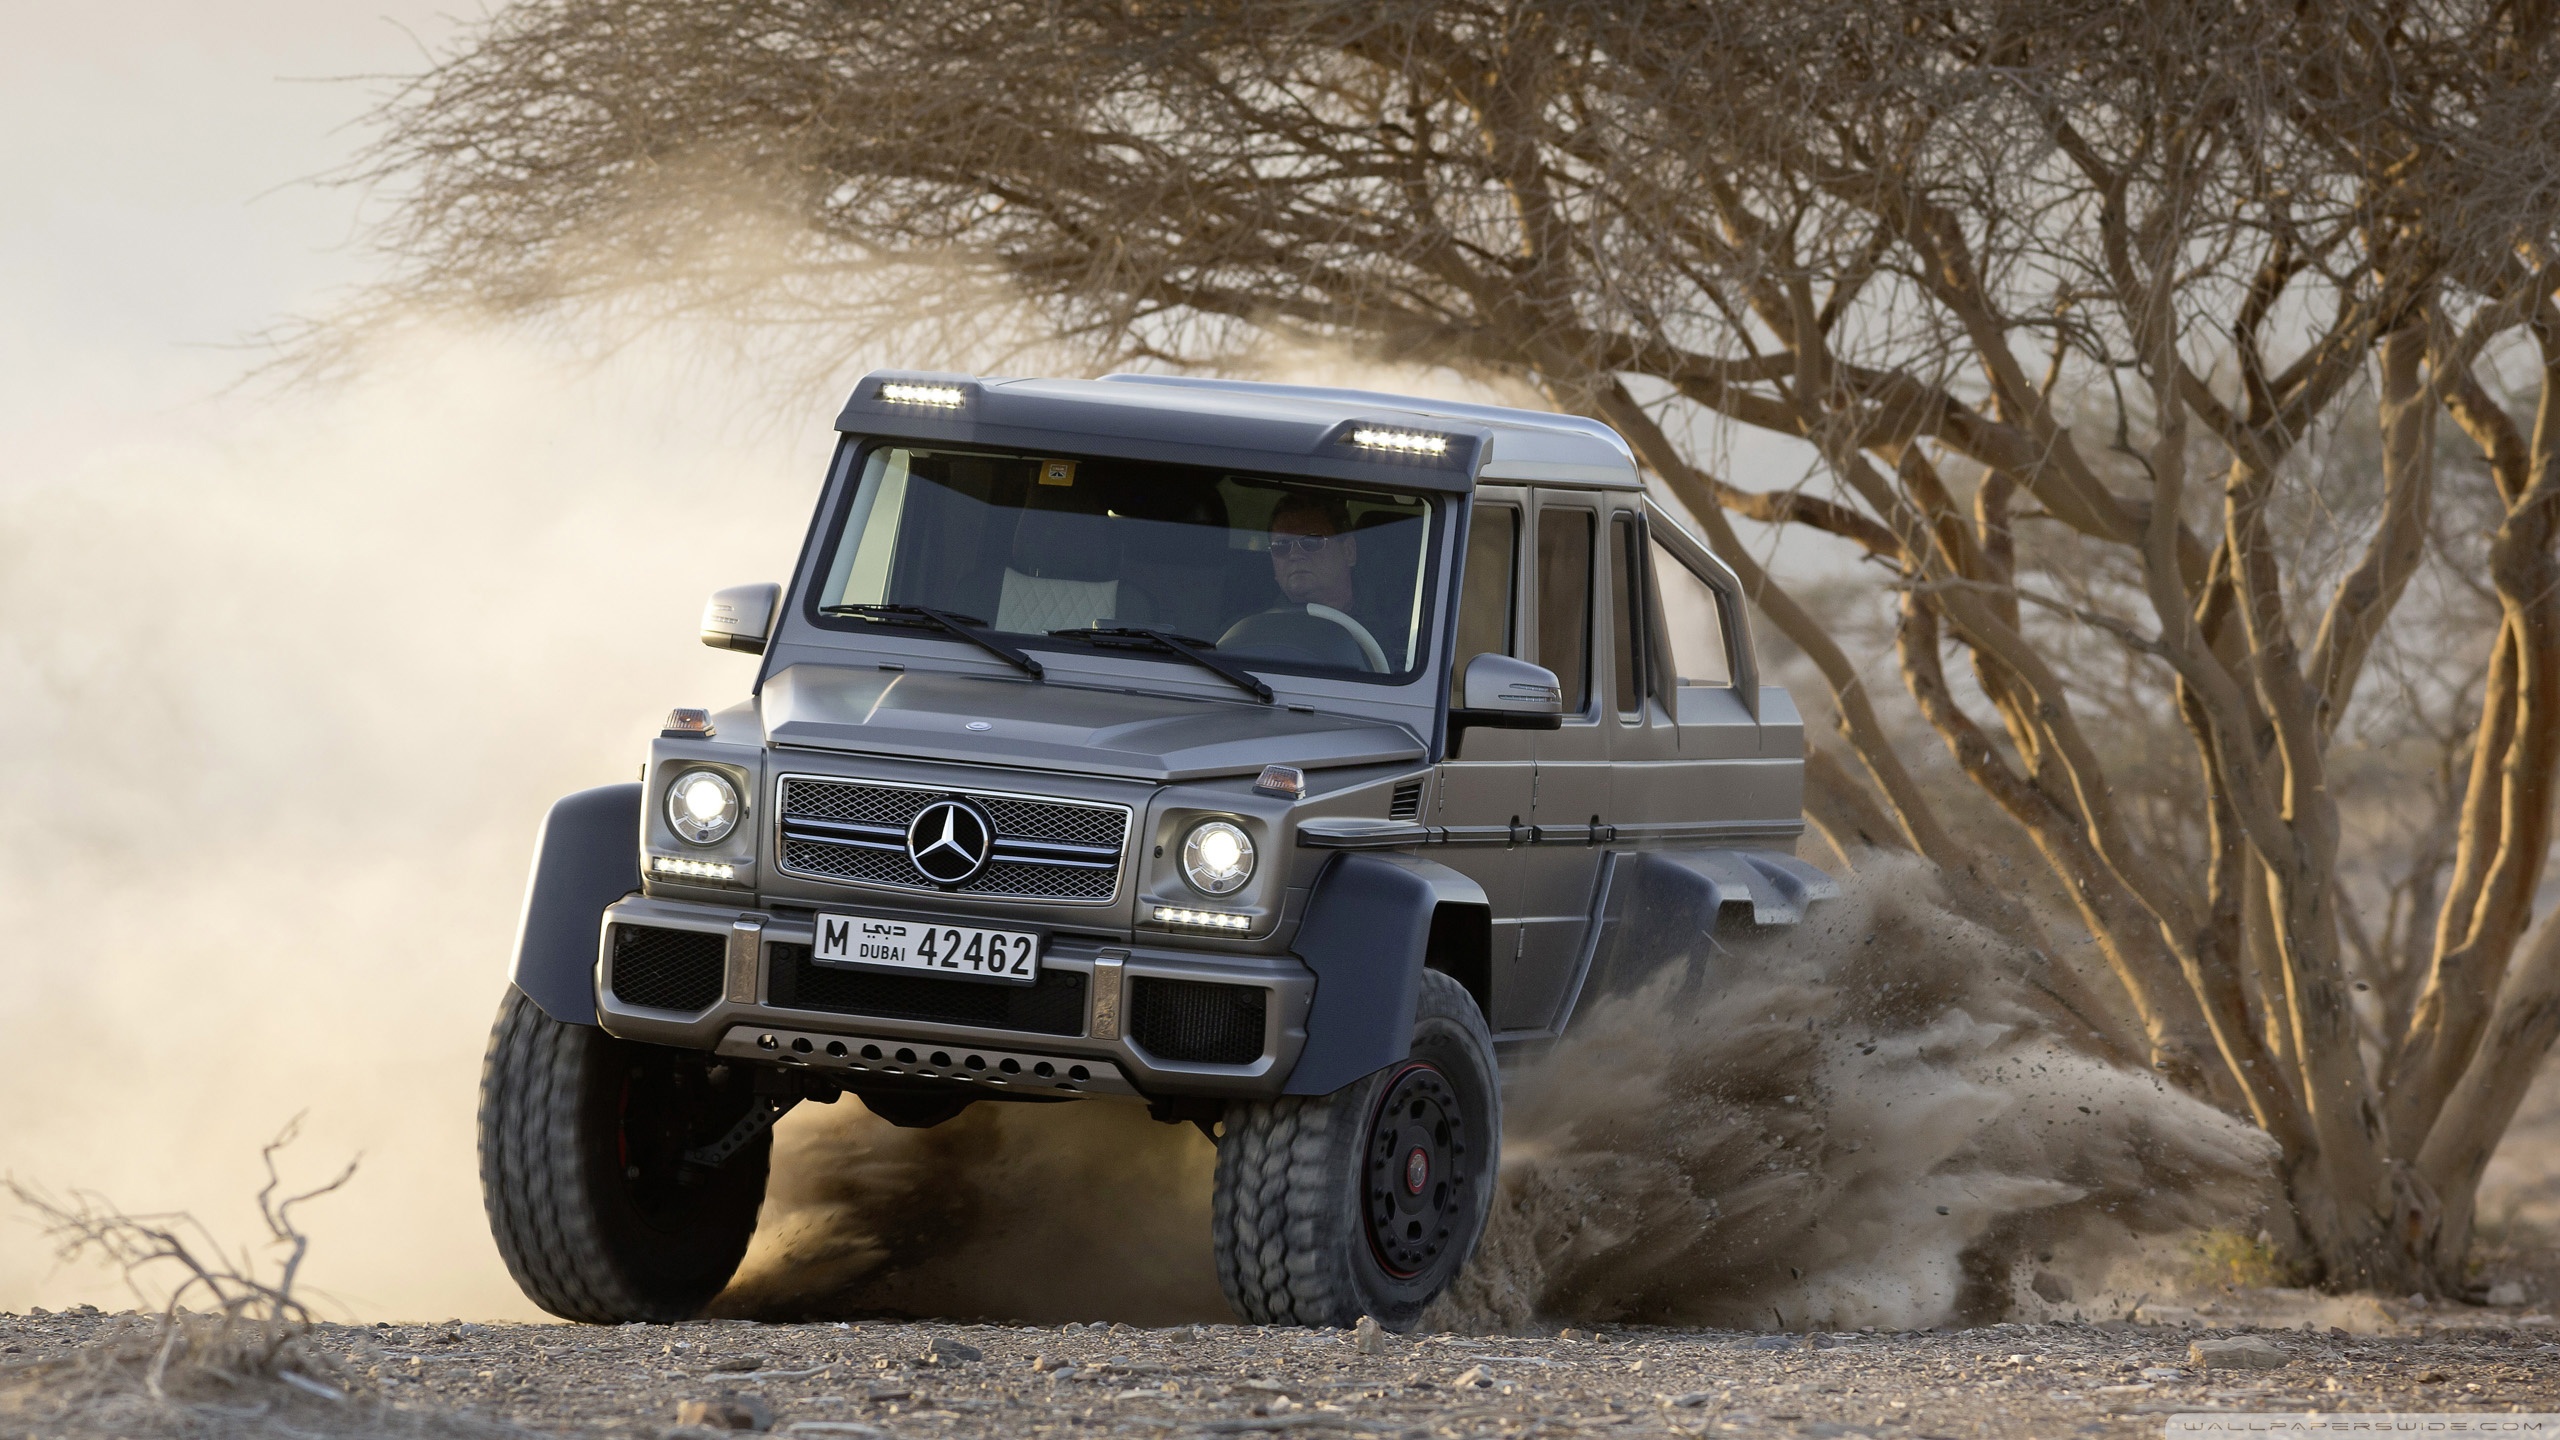 Mercedes G63 AMG 6x6 2013 Ultra HD Desktop Backgrounds Wallpapers for 4K UHD TV : Multi Display, Dual Monitor : Tablet : Smartphone